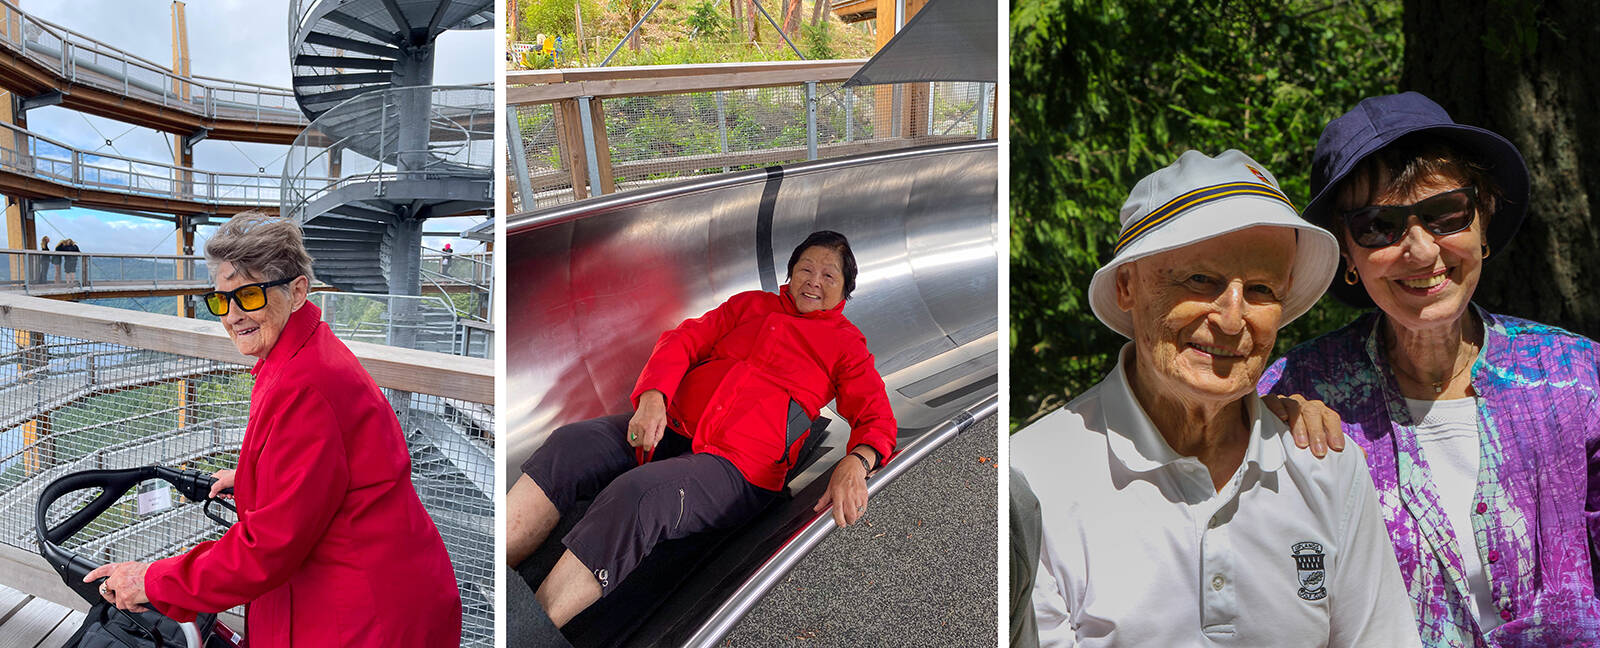 Berwick Royal Oak residents at the Malahat Skywalk (and slide!) and out picnicking.